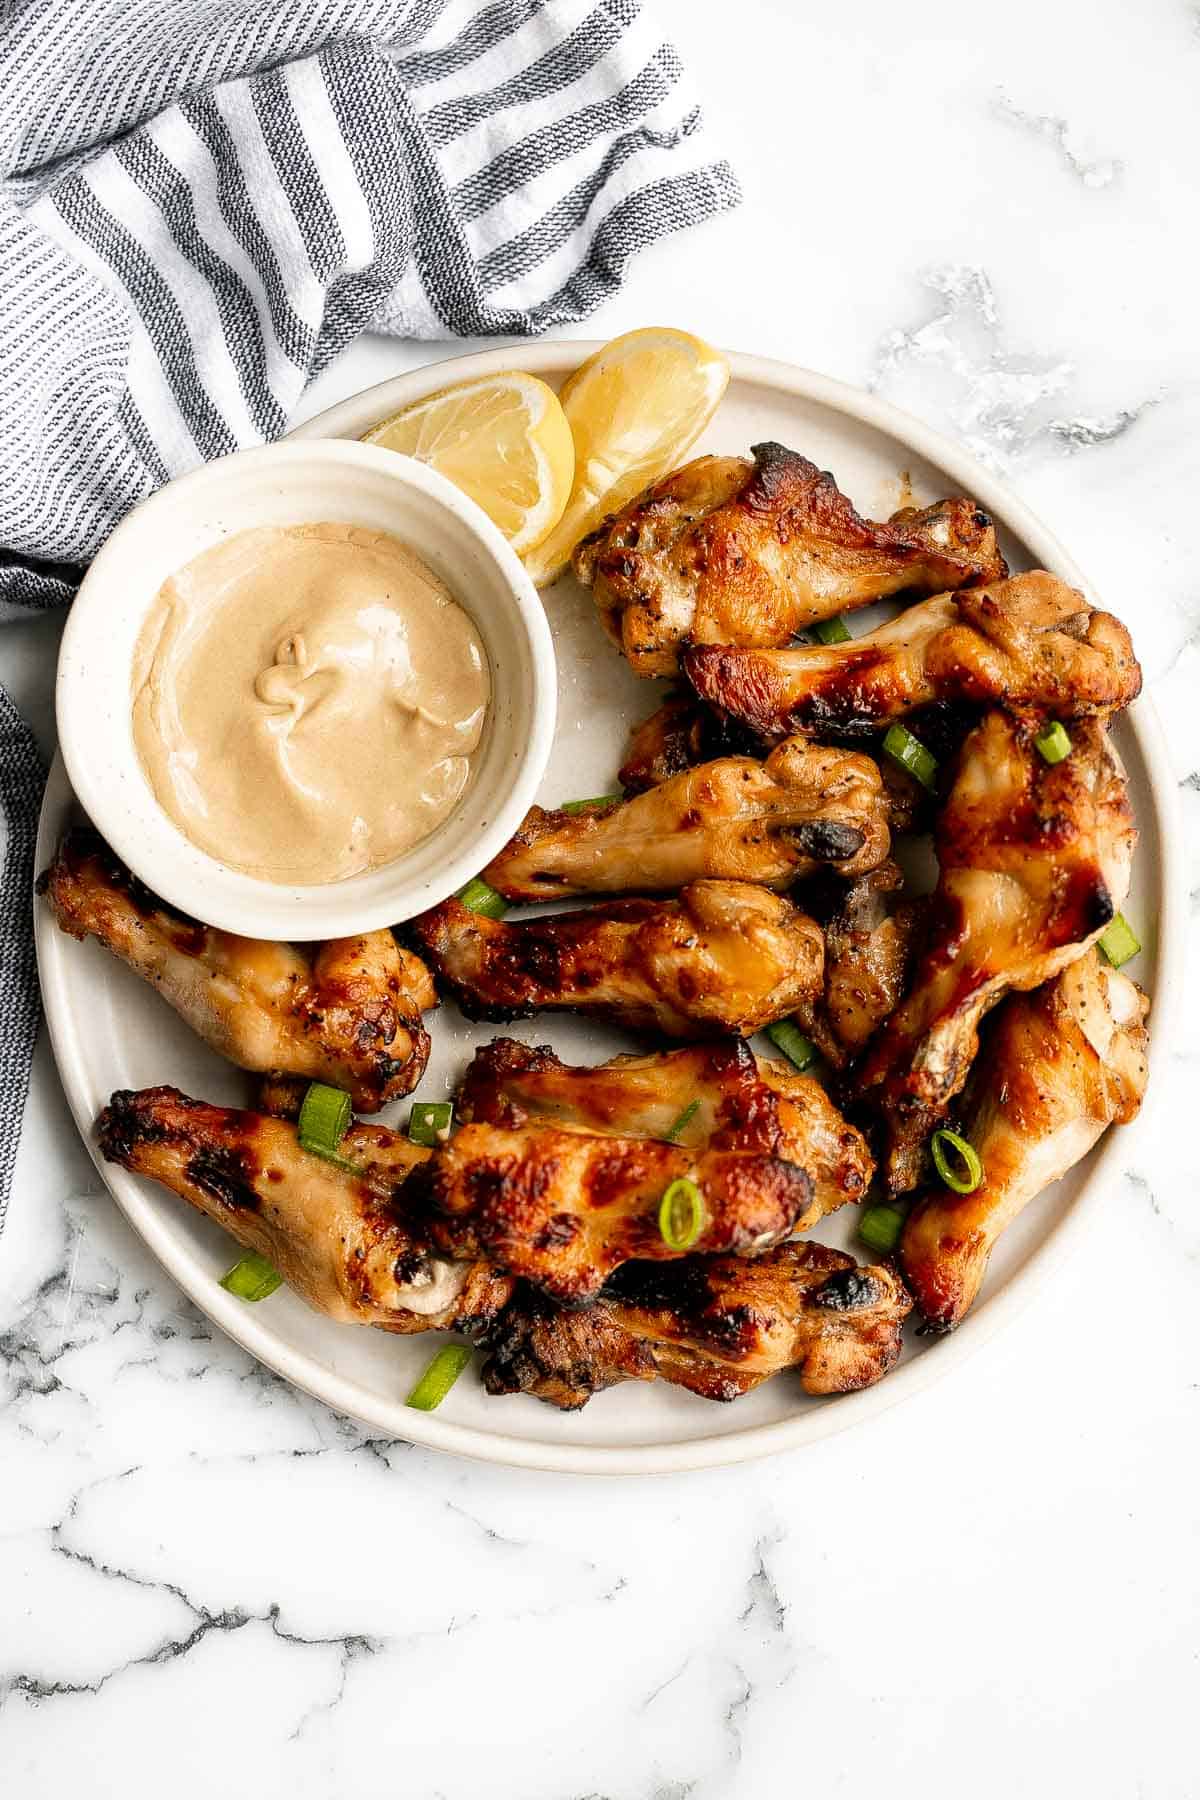 Honey mustard chicken wings are crispy on the outside but juicy and tender inside. Baked in an air fryer or oven, they have the best texture and flavor. | aheadofthyme.com